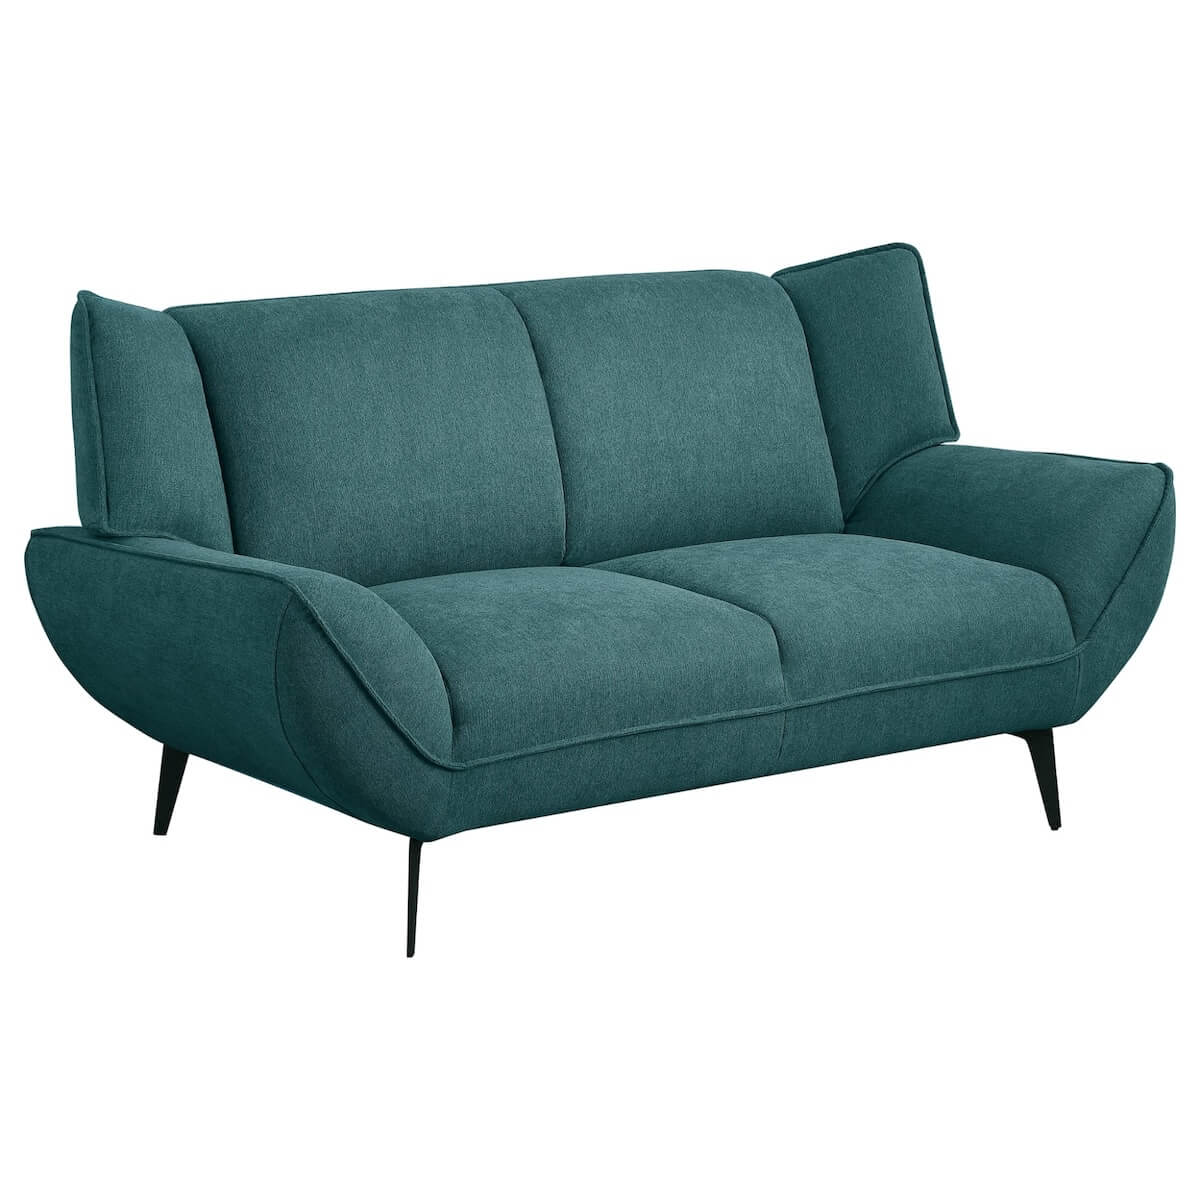 Small loveseat: Acton Upholstered Flared Arm Loveseat Teal Blue